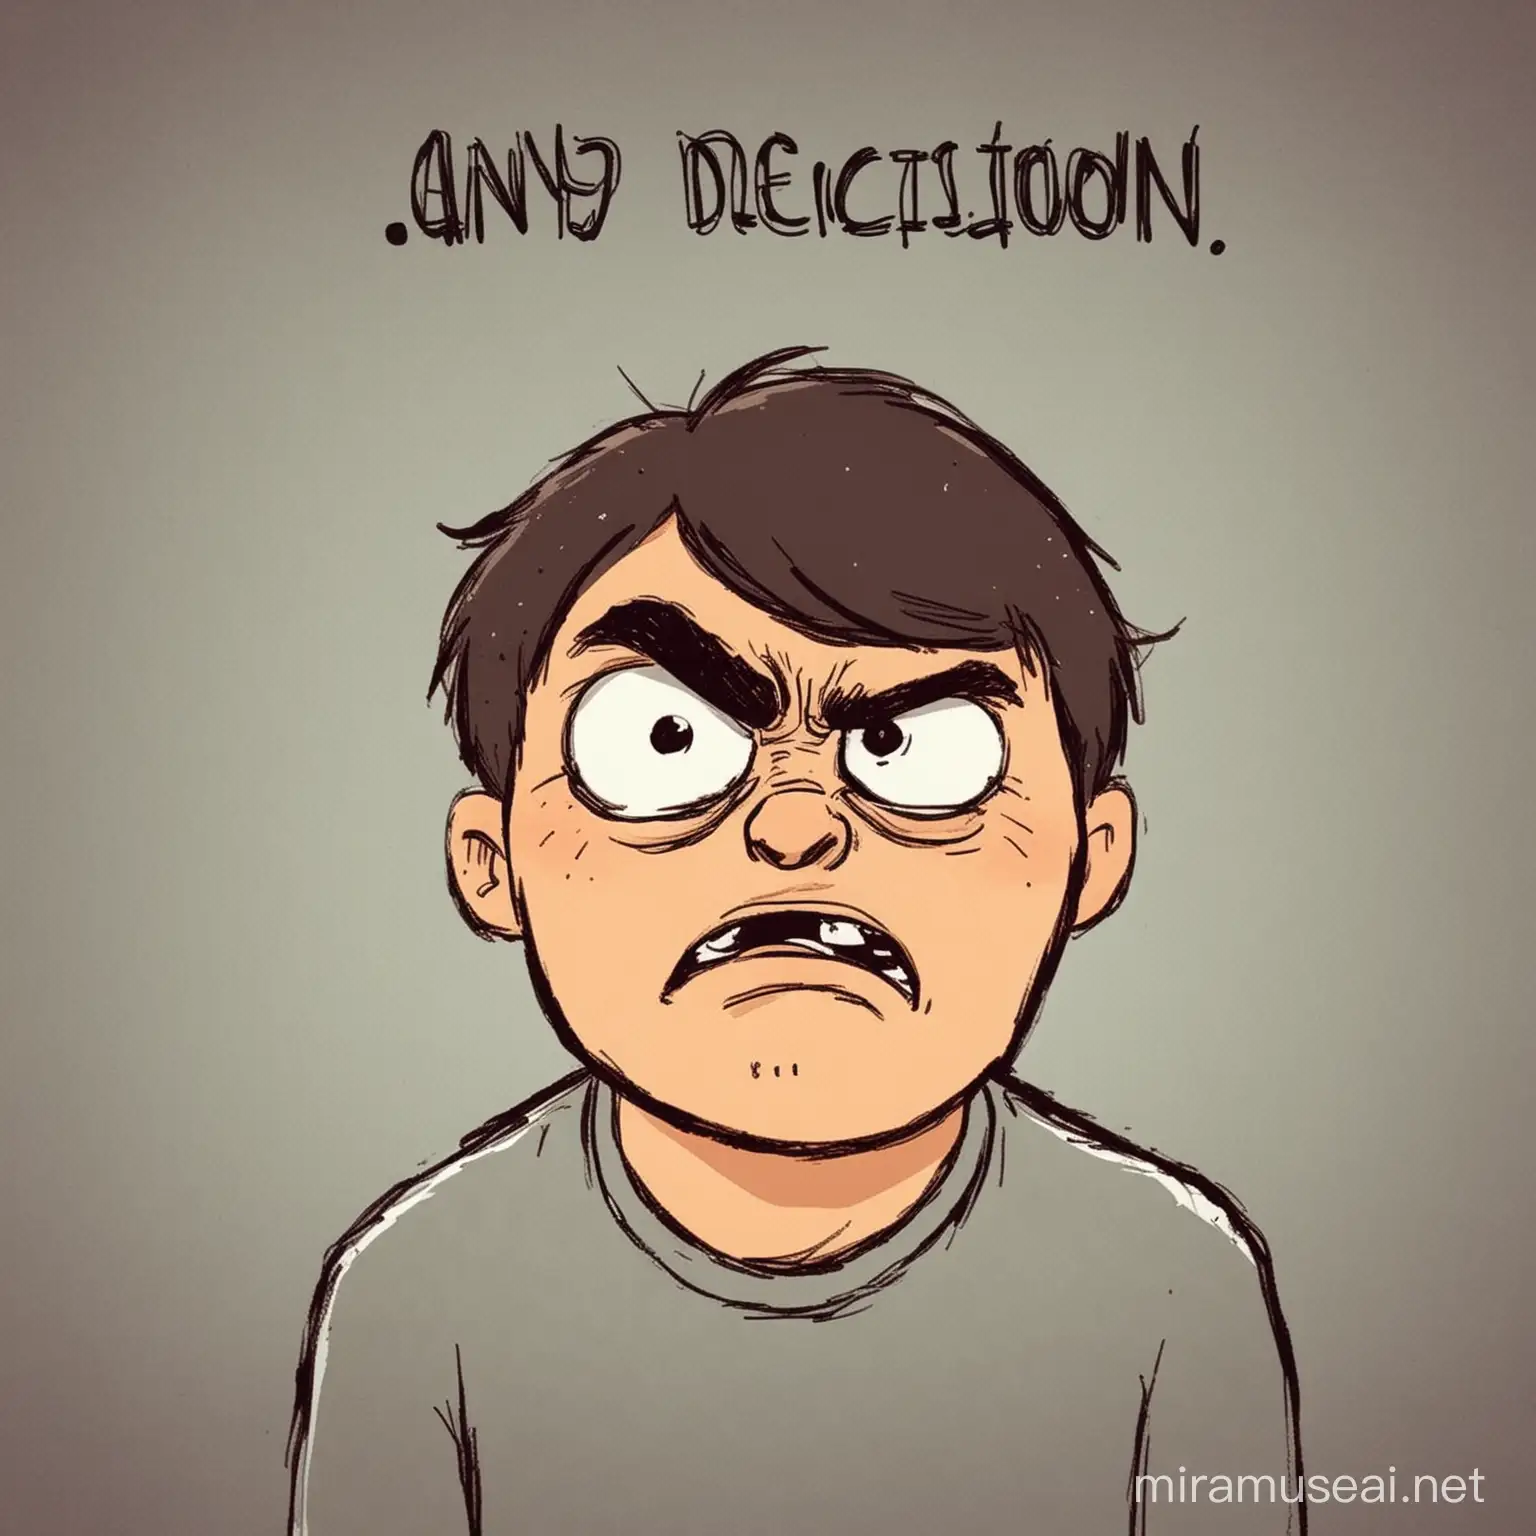 Frustrated Cartoon Character Reacting to a Decision